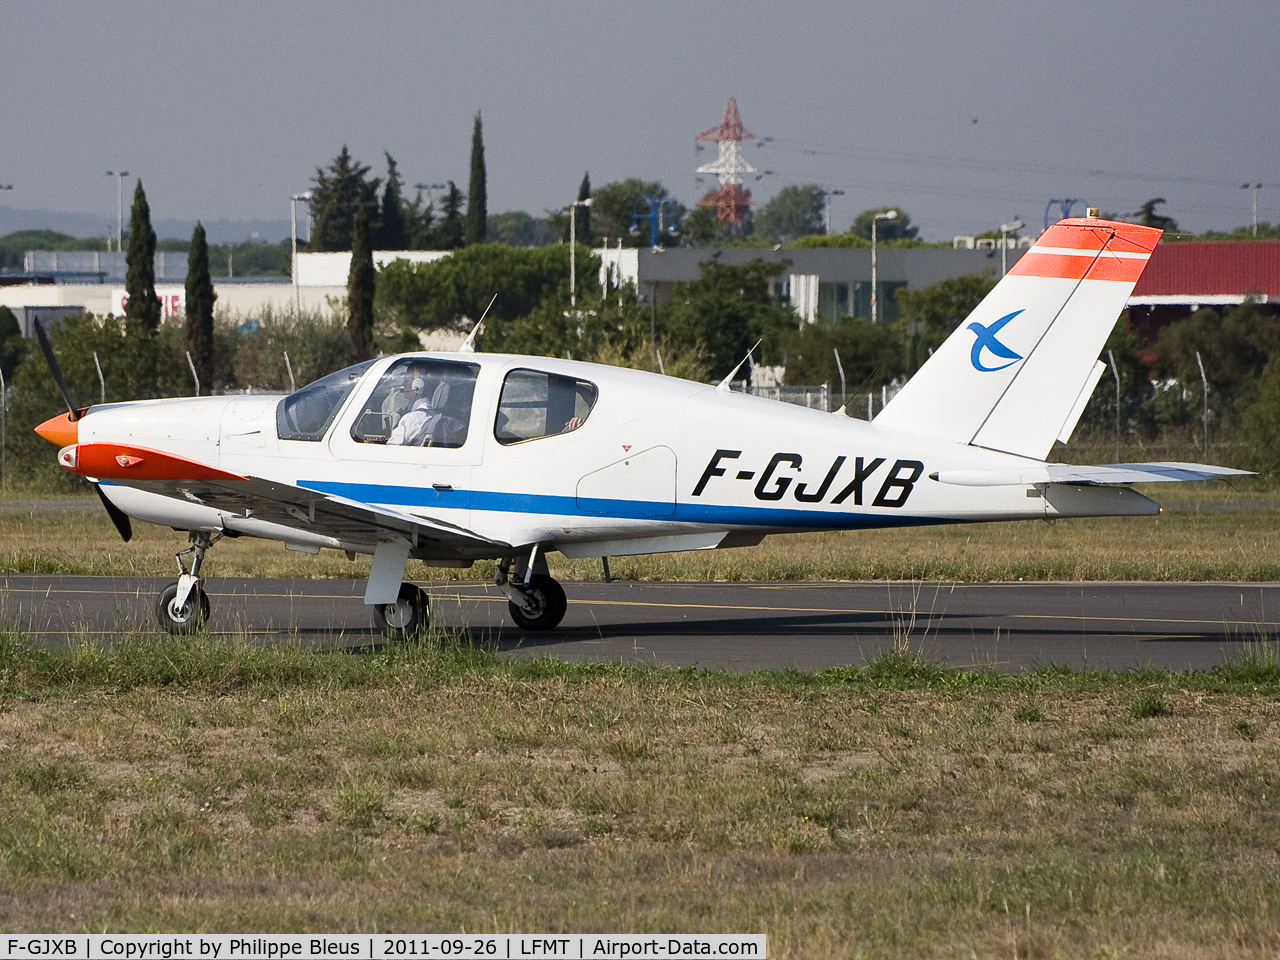 F-GJXB, 1991 Socata TB-20 C/N 1304, On taxiway Romeo, approaching taxiway Sierra (main taxiway of rwy 31L/13R = the secundary runway, dedicated to flying clubs and flying schools).